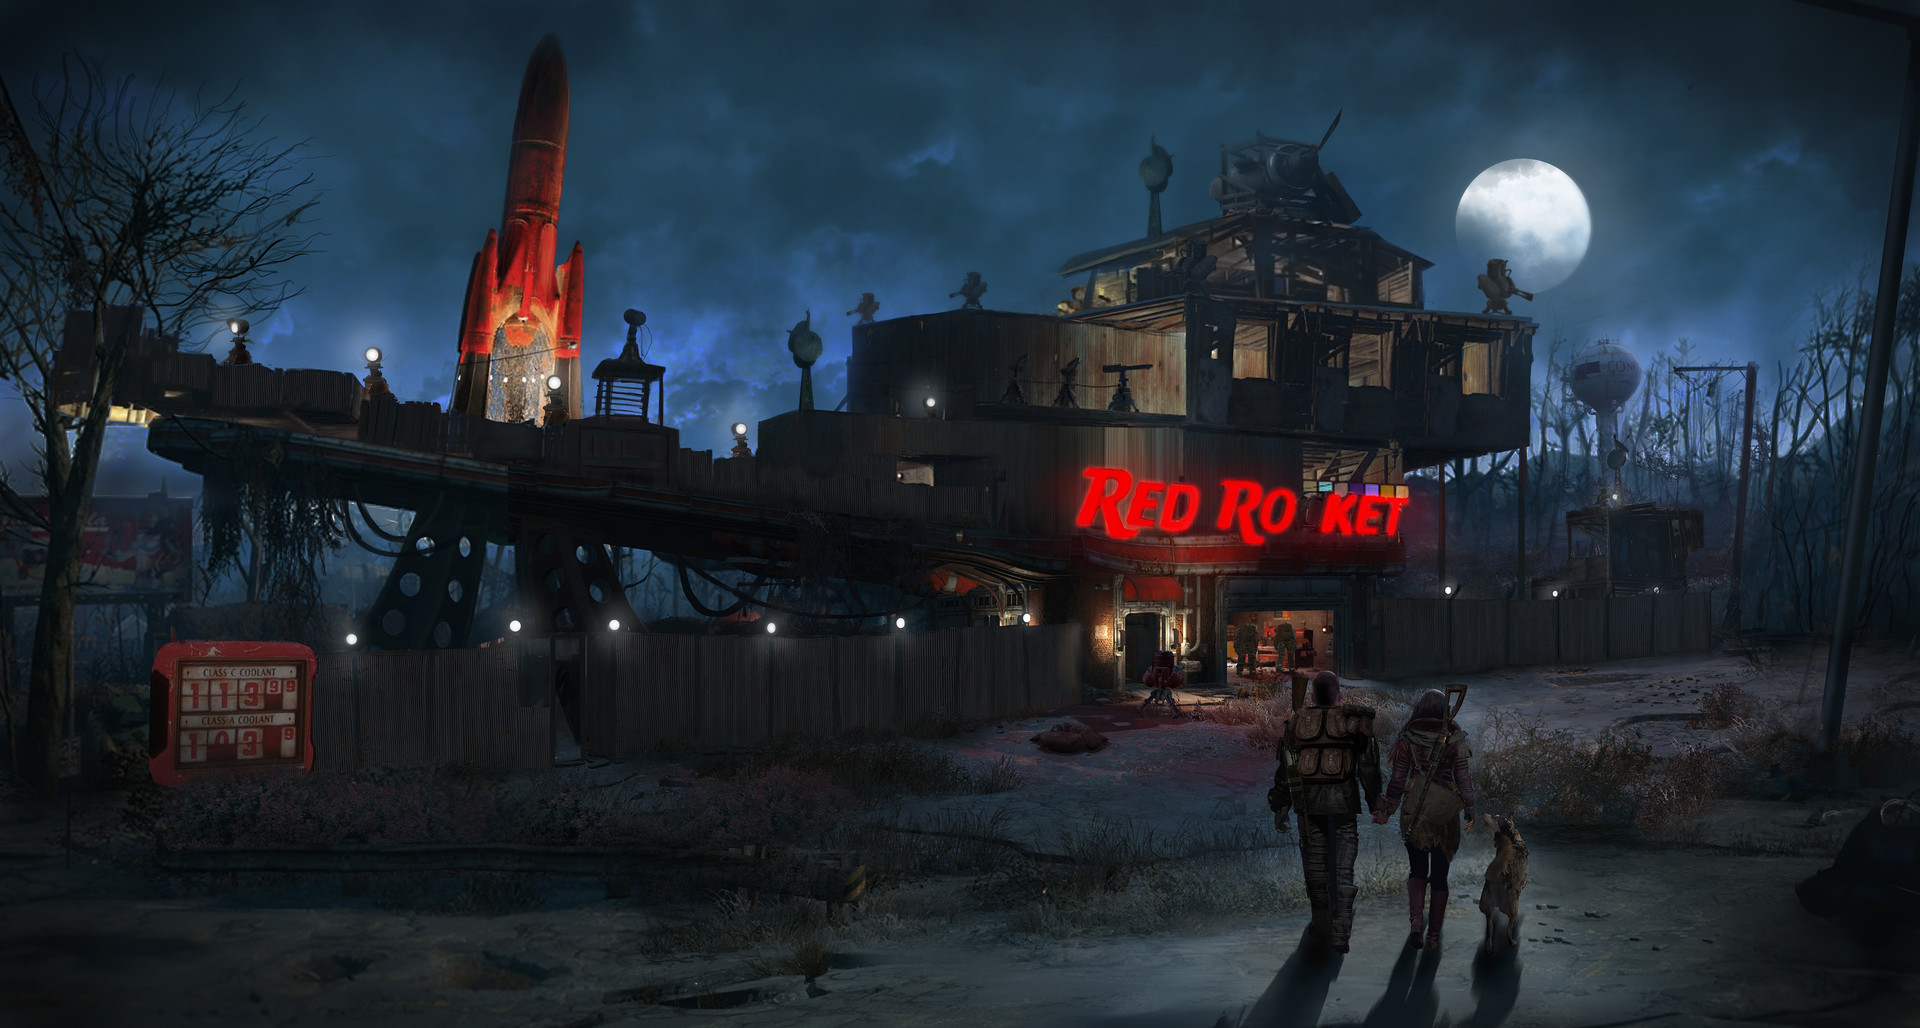 Red rocket fallout 4 фото 109